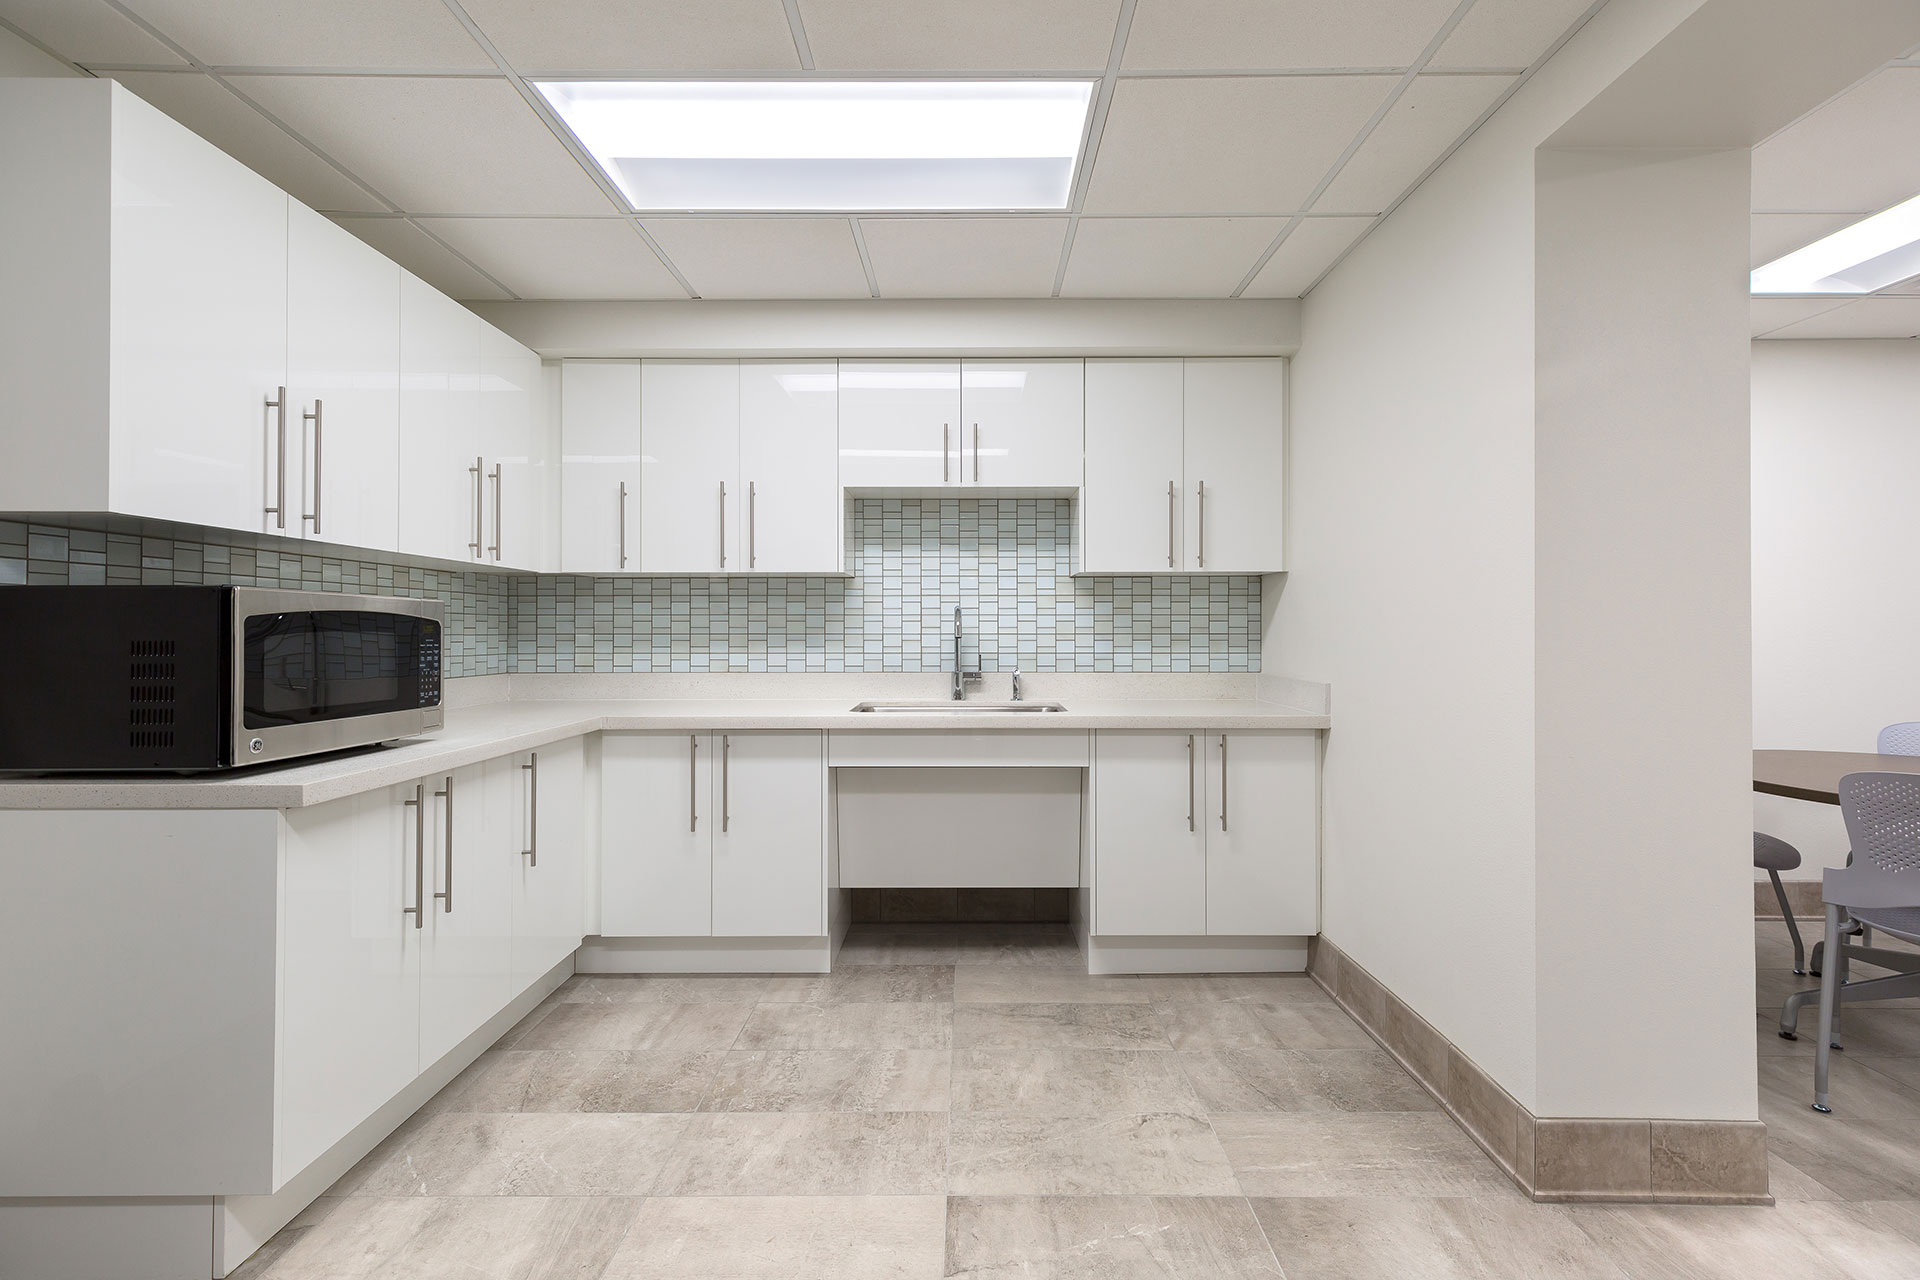 A white breakroom kitchenette with a white cabinets, a beige synthetic countertop, black microwave, and undermount sink, with a beige tile floor and paneled ceiling.